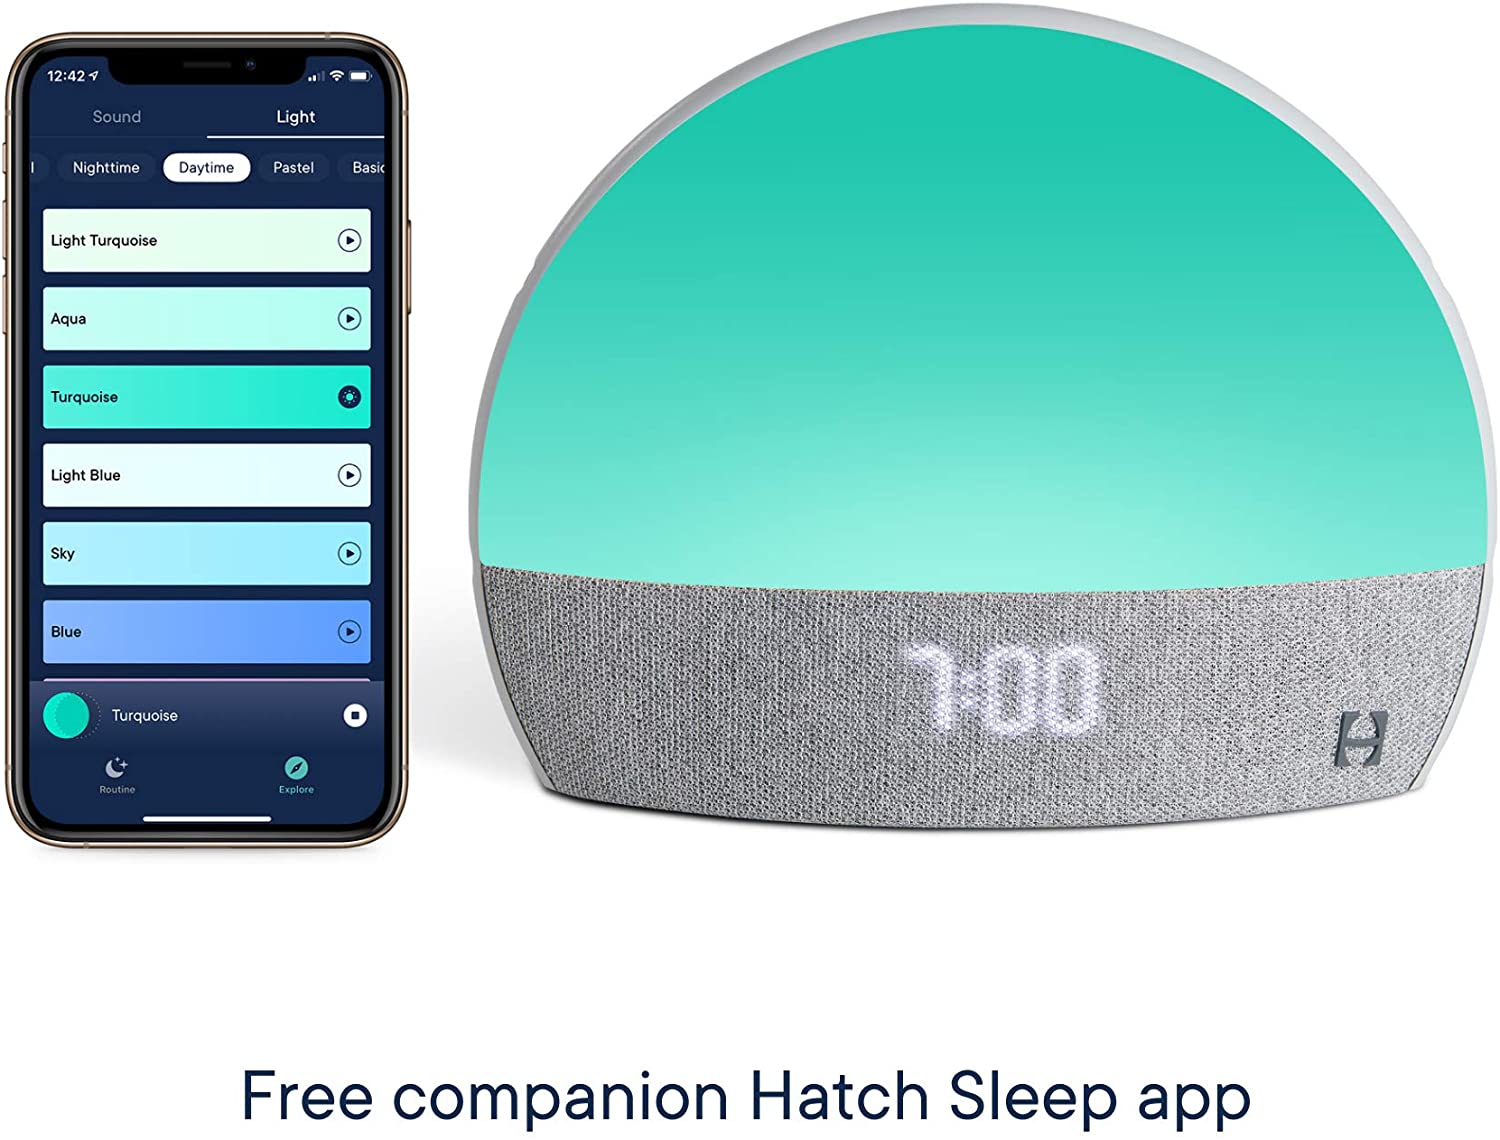 Hatch Restore - Sound Machine, Smart Light, Personal Sleep Routine, Bedside Reading Light, Wind Down Content and Sunrise Alarm Clock for Gentle Wake Up - image 3 of 6